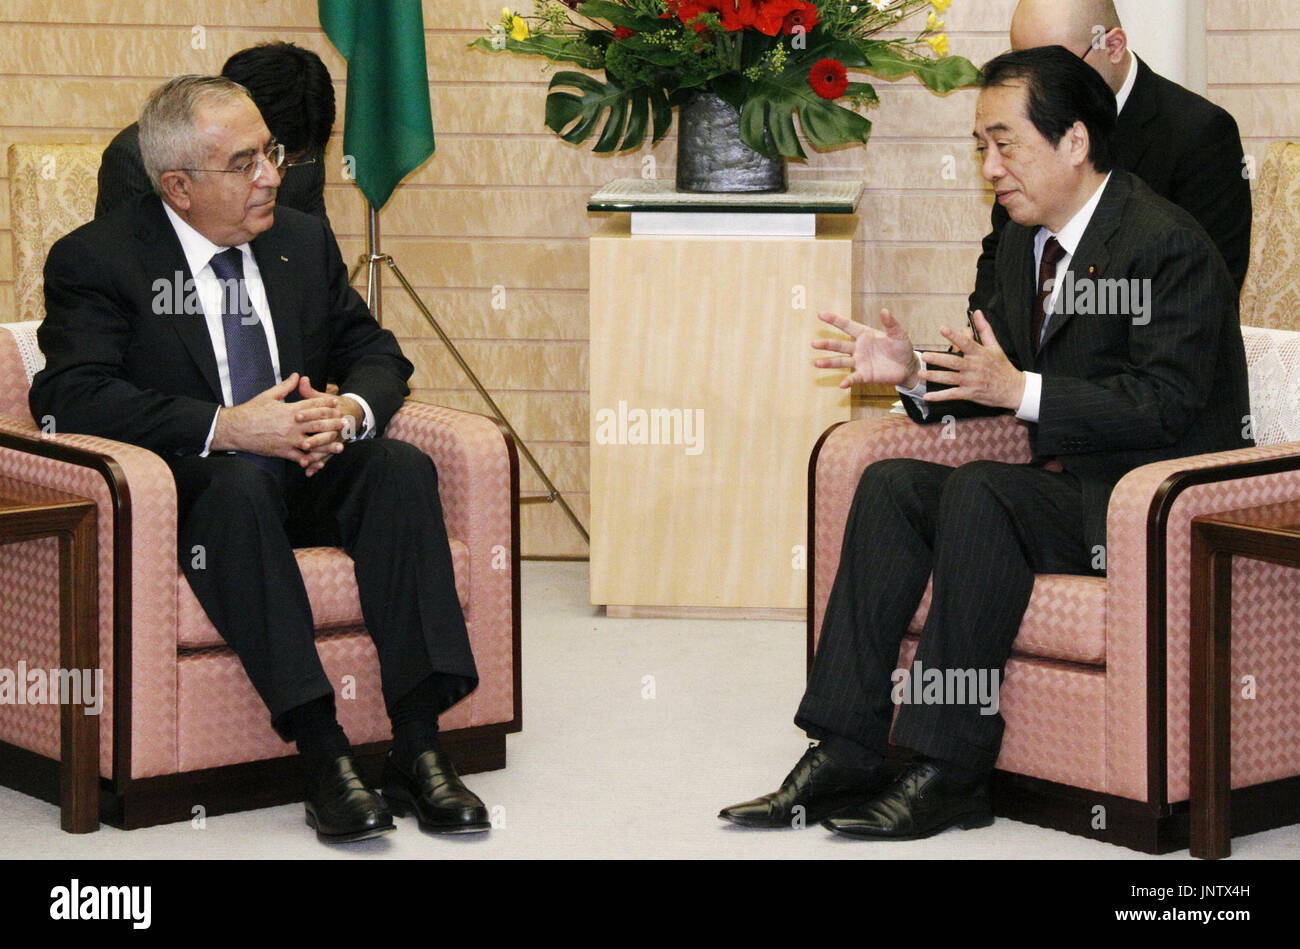 TOKYO, Japan - Japanese Prime Minister Naoto Kan (R) and Palestinian Prime Minister Salam Fayyad speak during their meeting at the premier's office in Tokyo on Nov. 24, 2010. Kan urged Fayyad to resume peace negotiations with Israel, as direct peace talks between the two sides remain stalled because of Israeli settlement on the West Bank. (Kyodo) Stock Photo